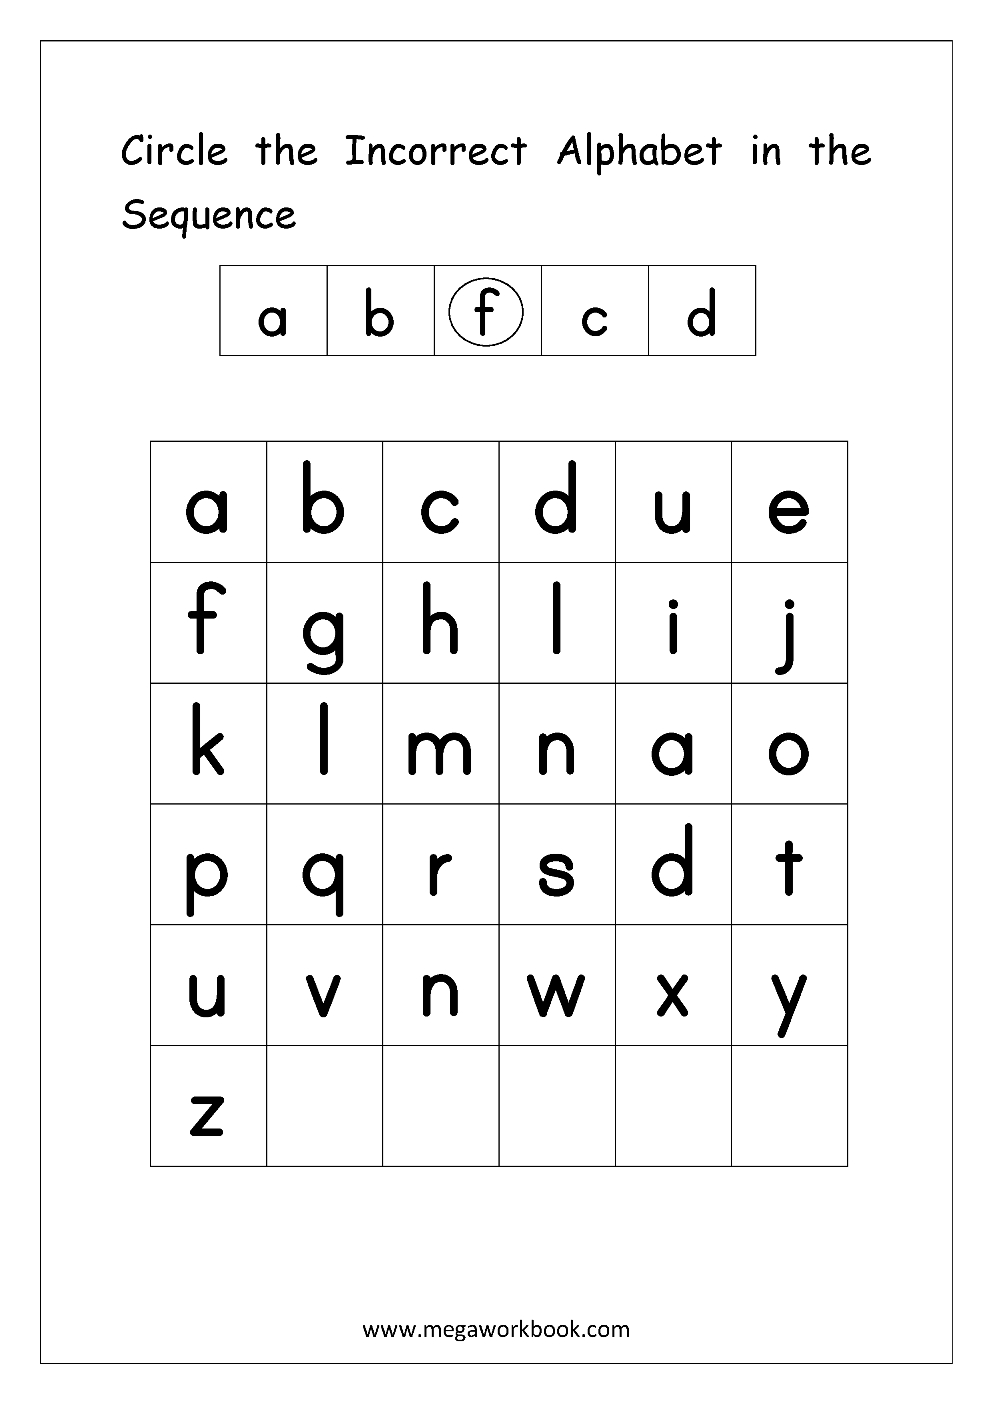 Alphabet Ordering Worksheet - Circle Incorrect In The with regard to Alphabet Sequencing Worksheets For Kindergarten